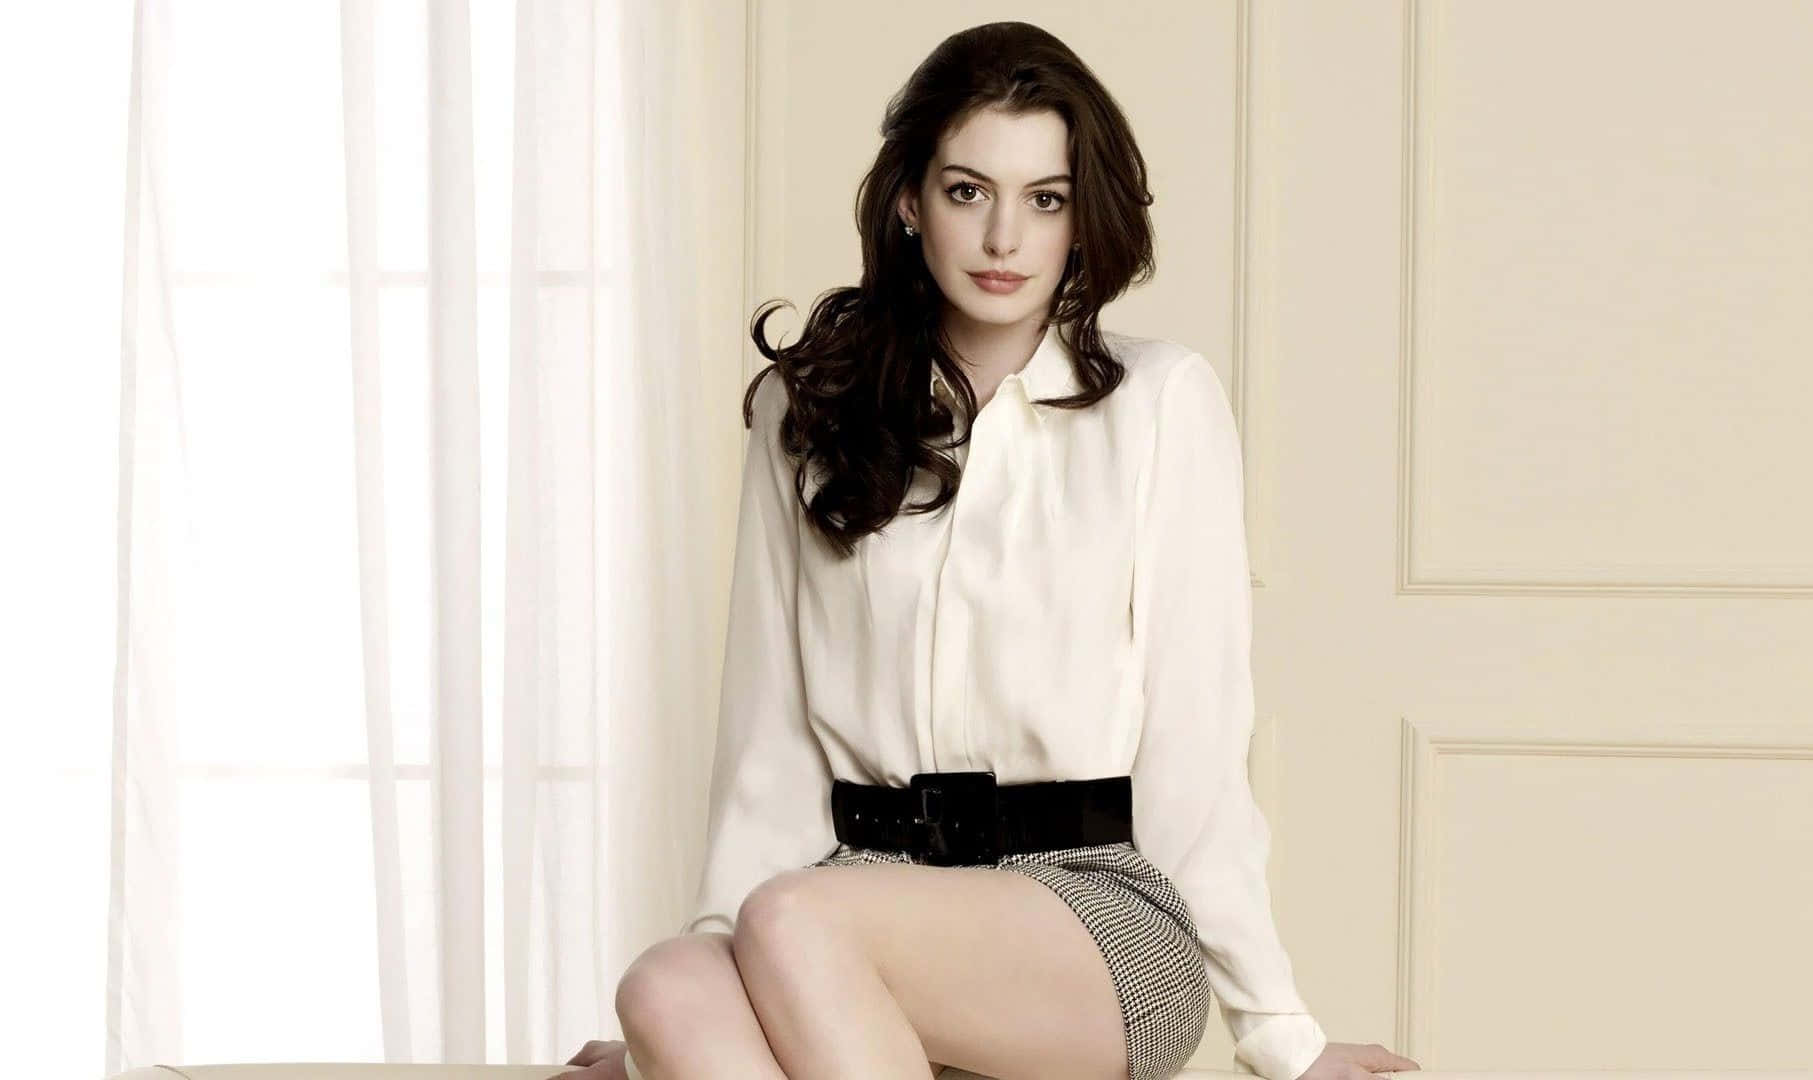 Actress Anne Hathaway